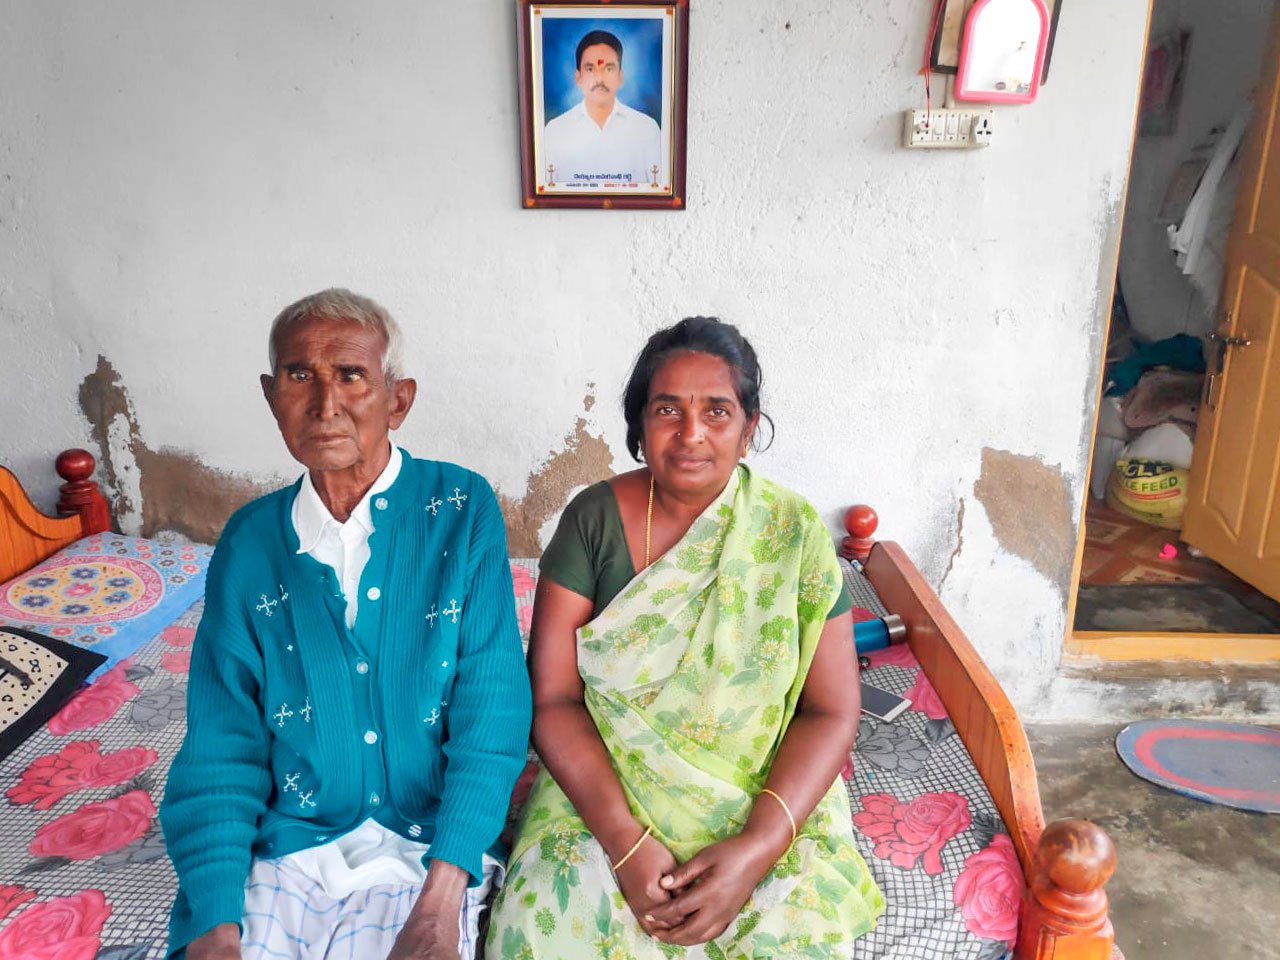 Drought, fluctuating prices and excess rainfall have been dealing a harsh blow to tomato growers in Andhra's Rayalseema region. The pandemic made it worse for farmers like Amarnath Reddy and Chinna Reddappa